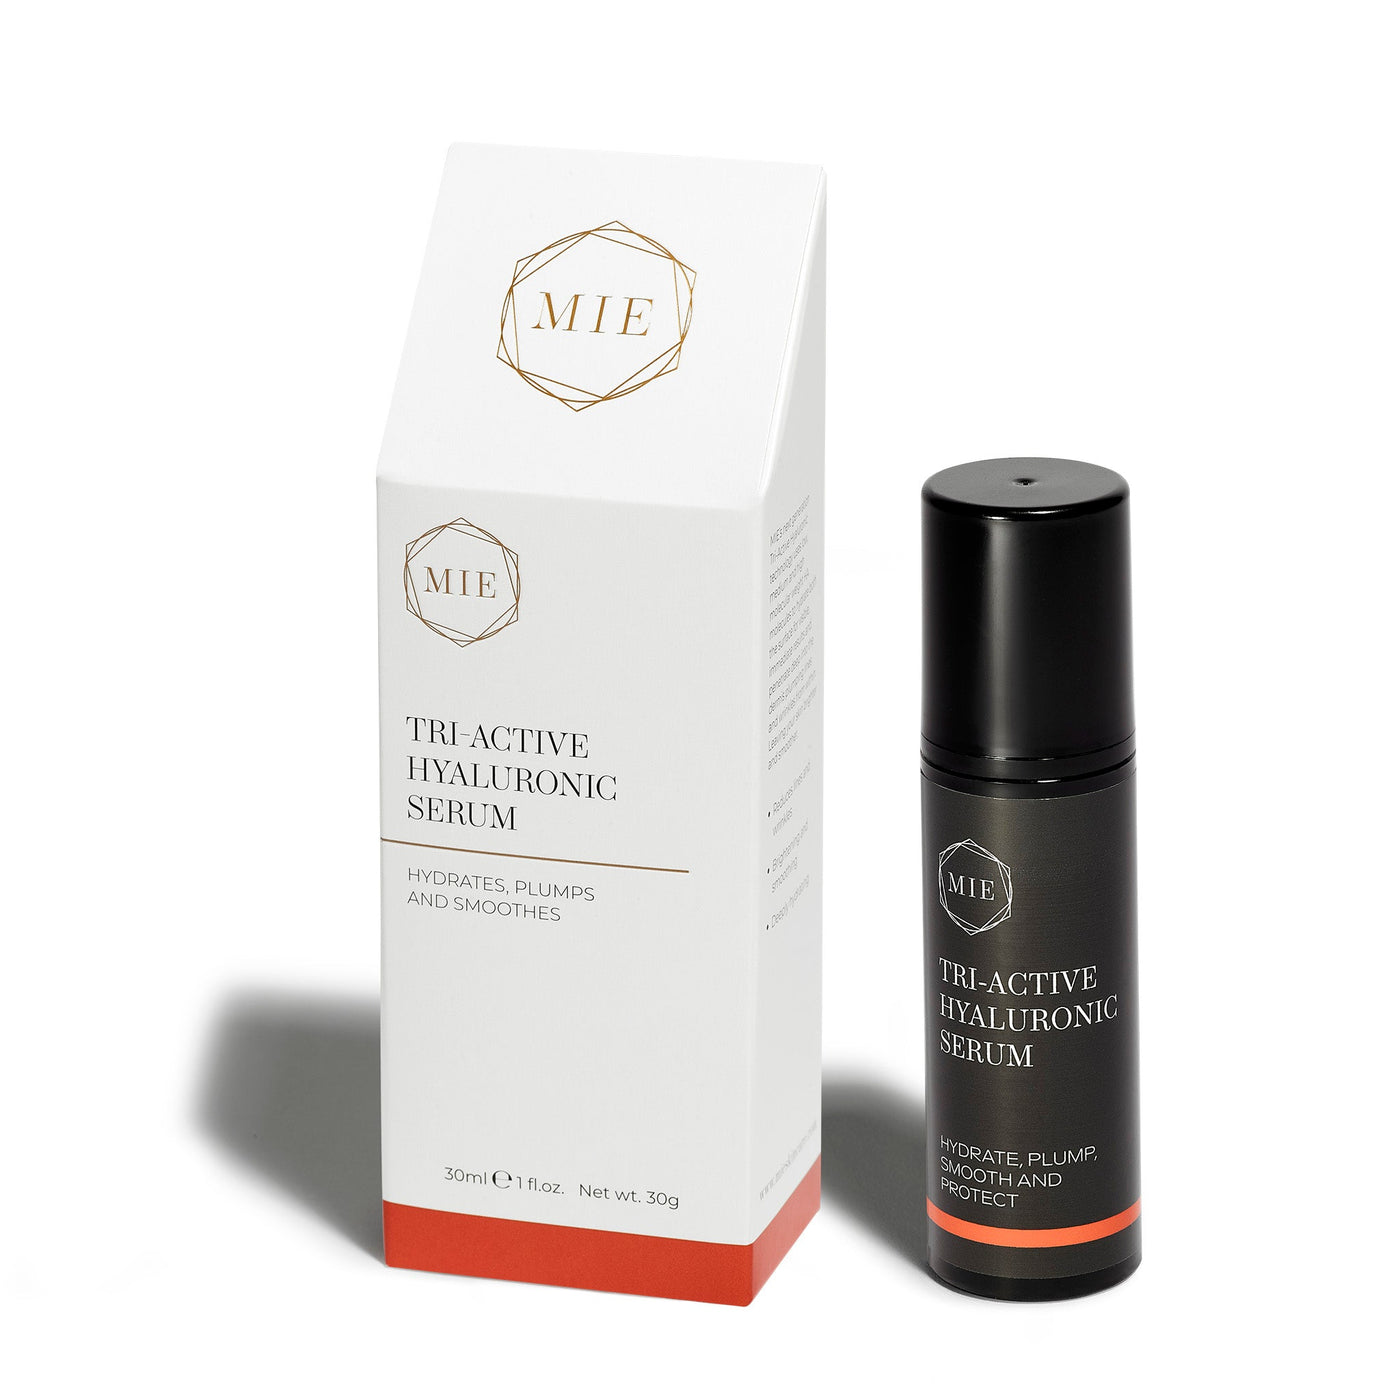 Tri-Active Hyaluronic Serum - MIE Skincare